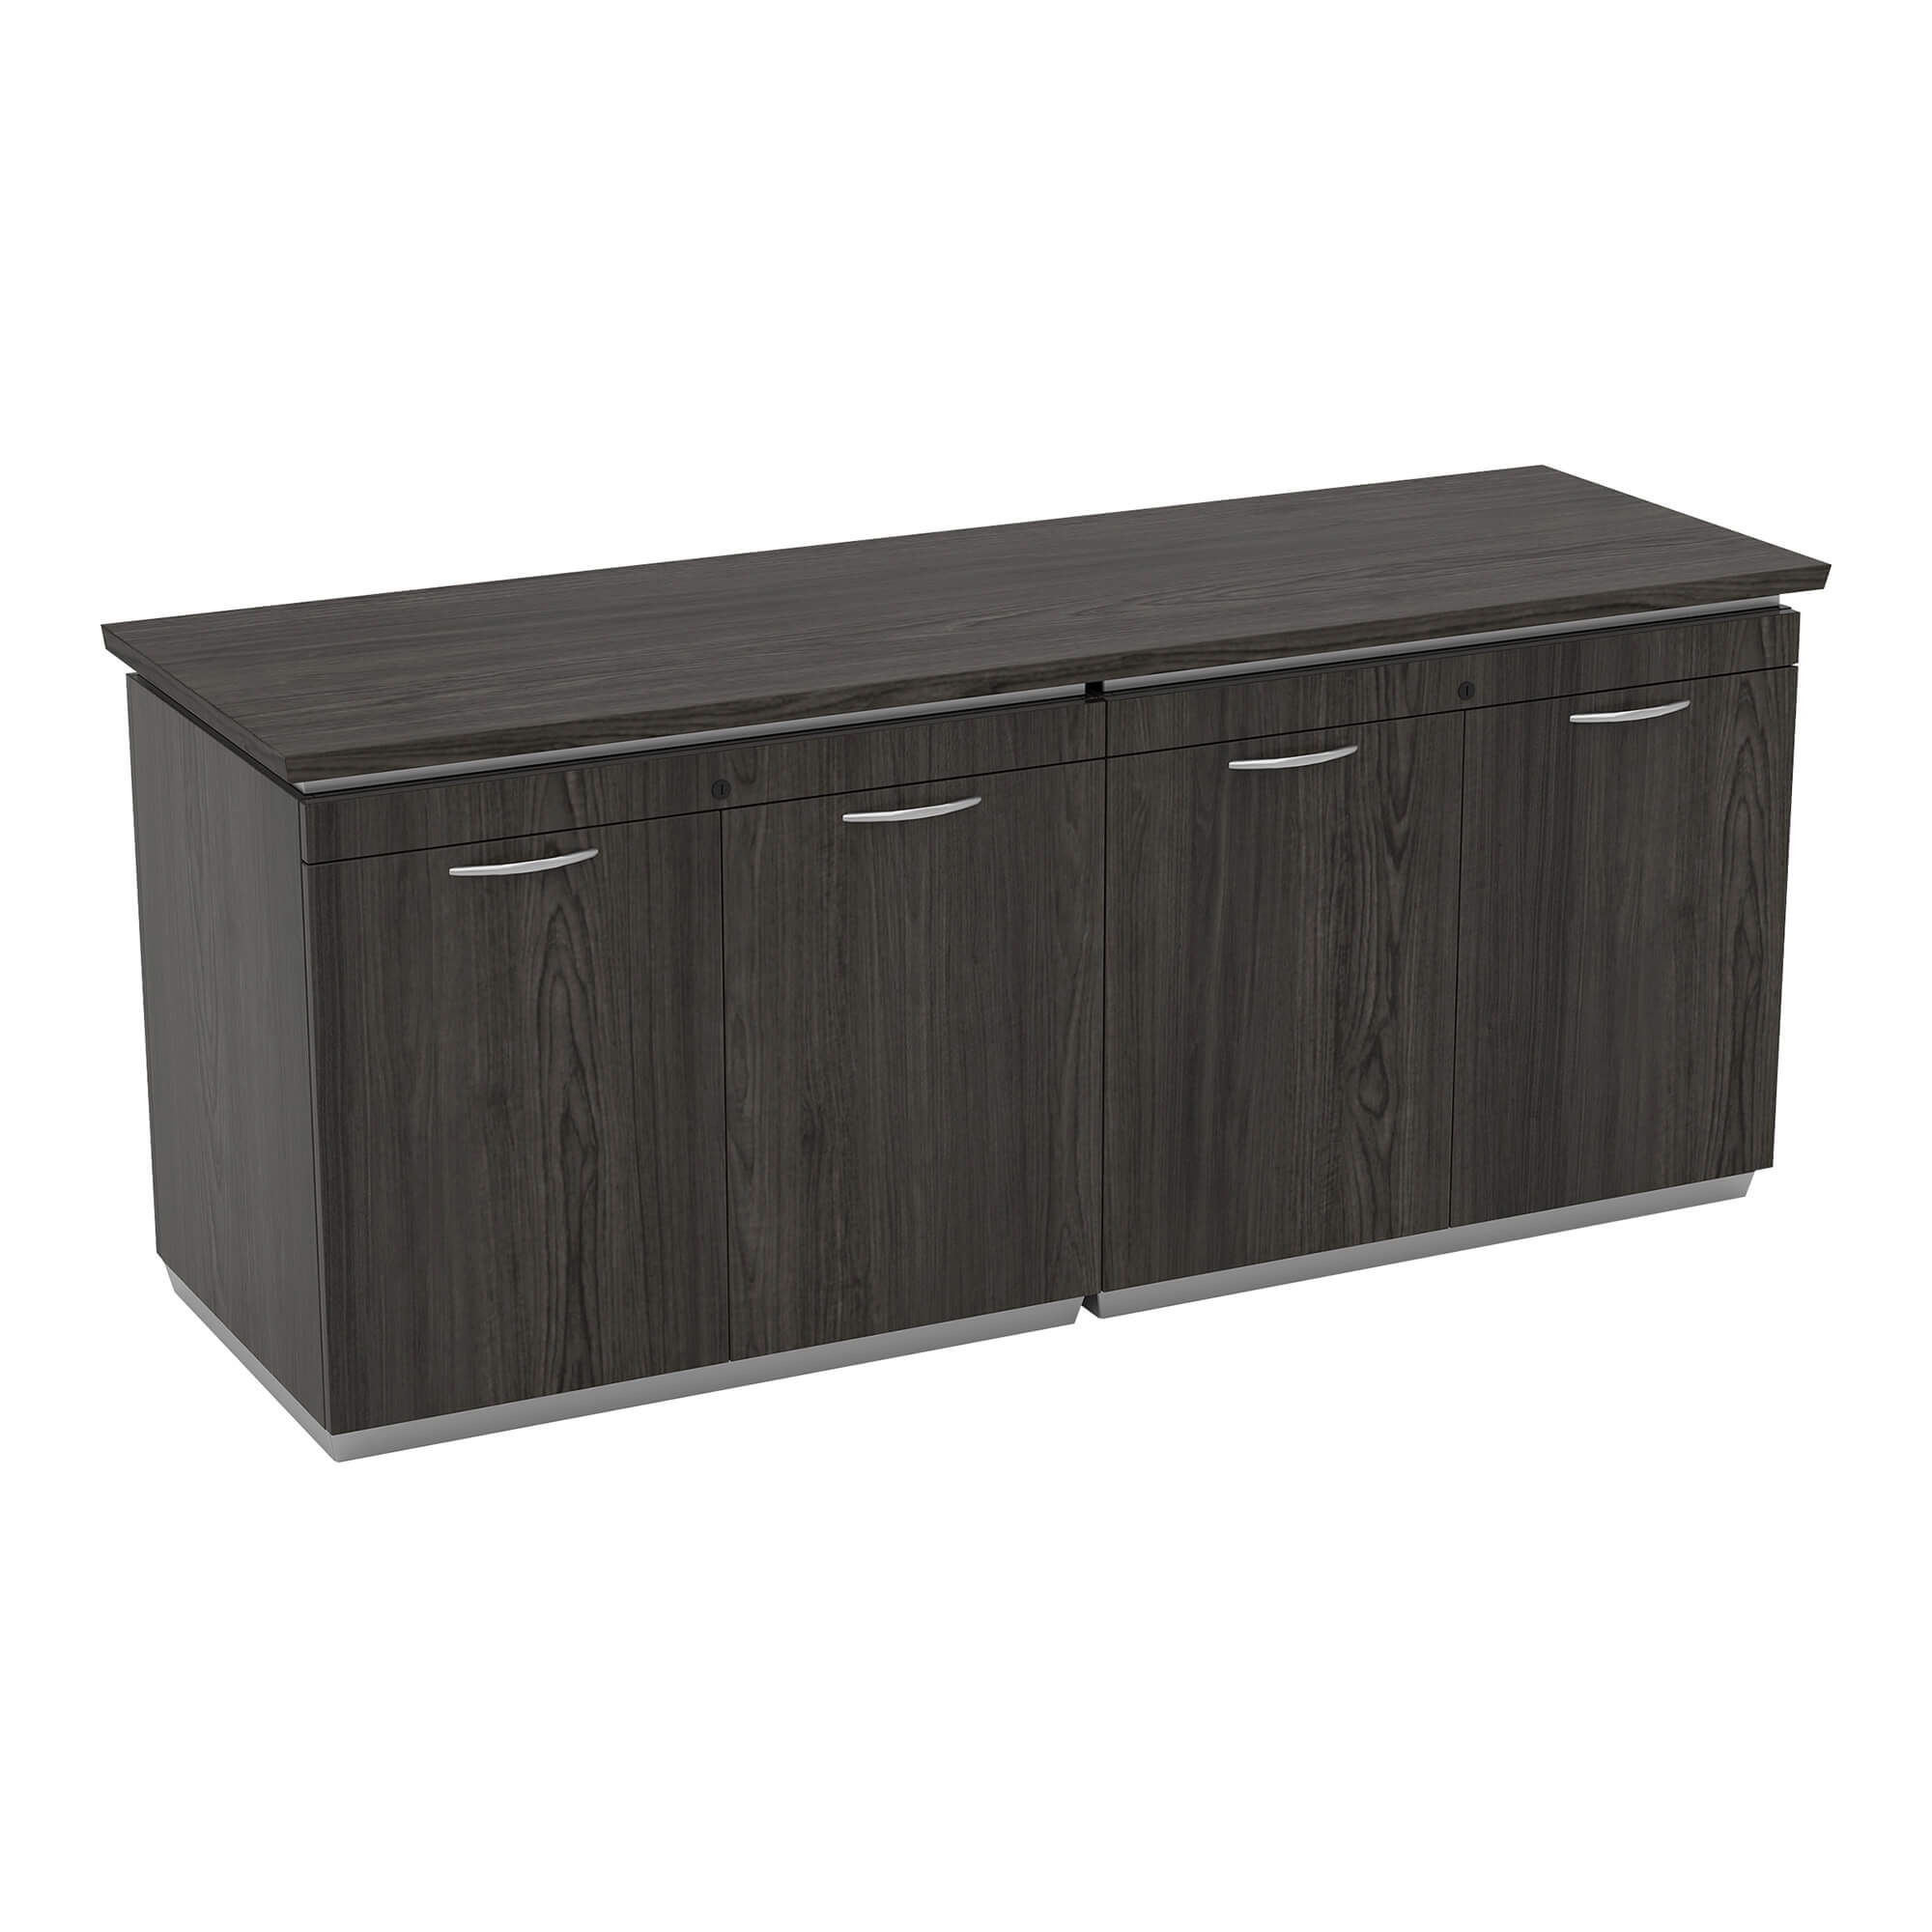 black-tie-conference-room-tables-office-storage-cabinet-72-inch.jpg